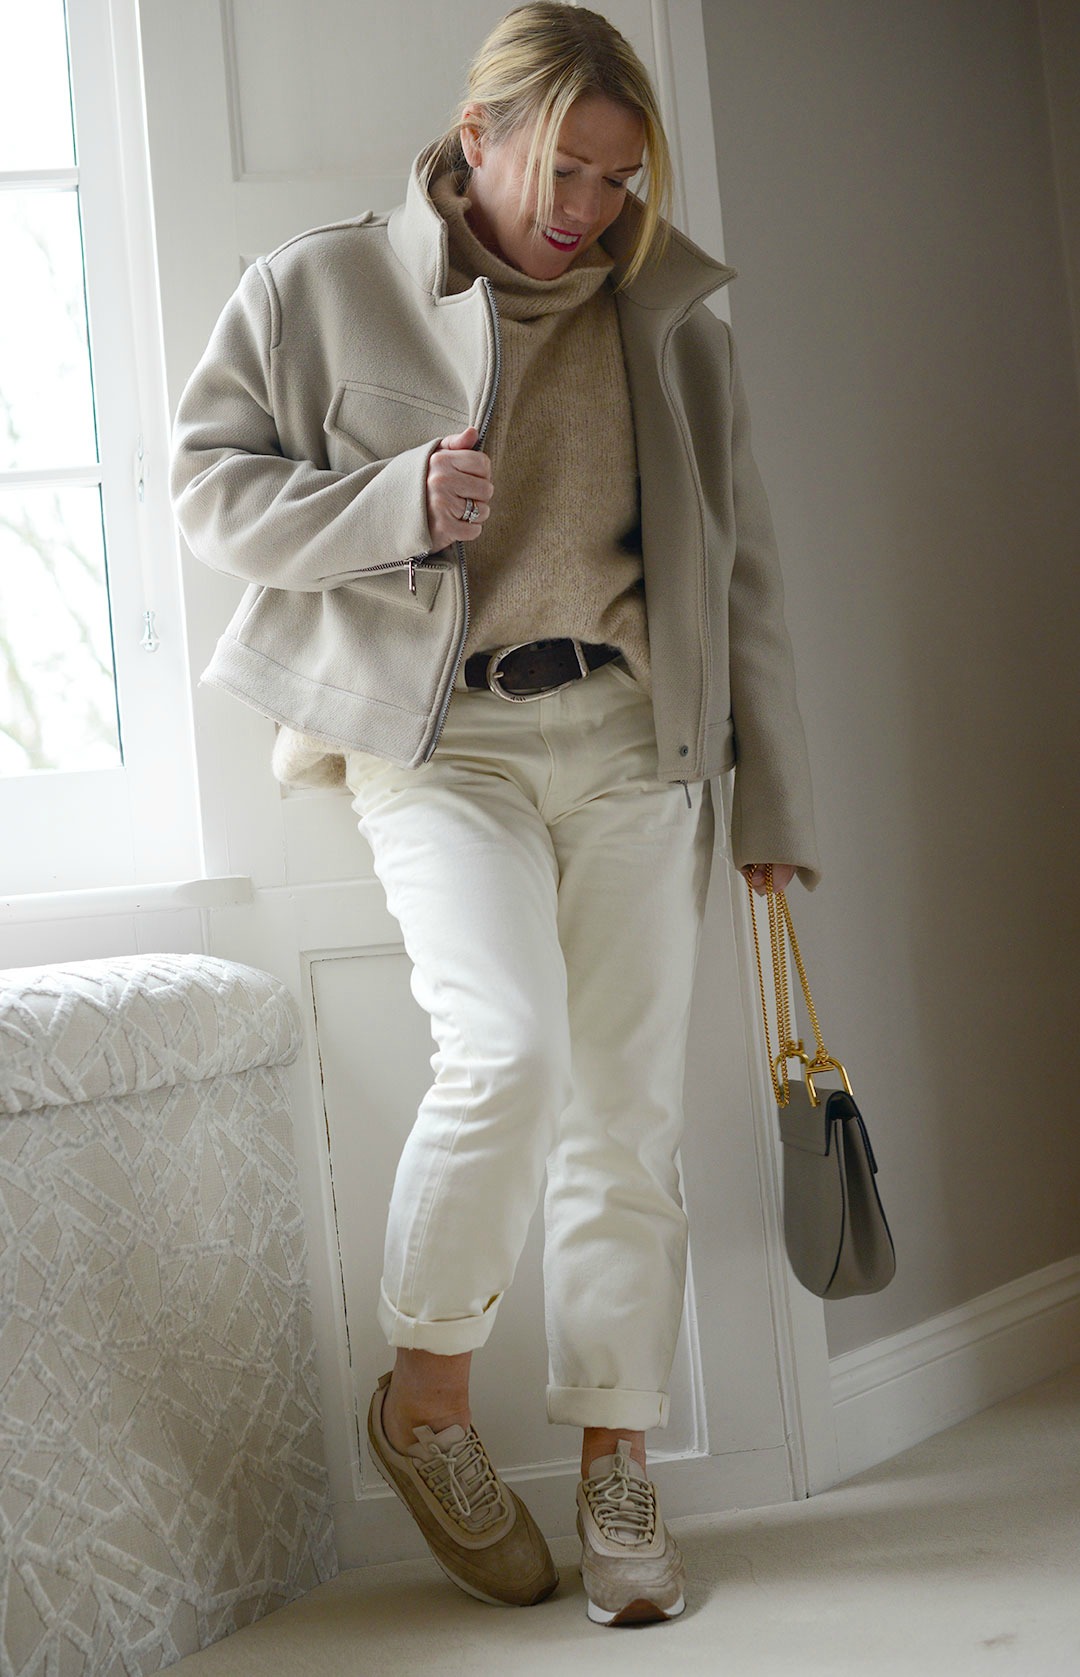 3 Easy Ways To Style The Beige Trend This Season-notesfromastylist